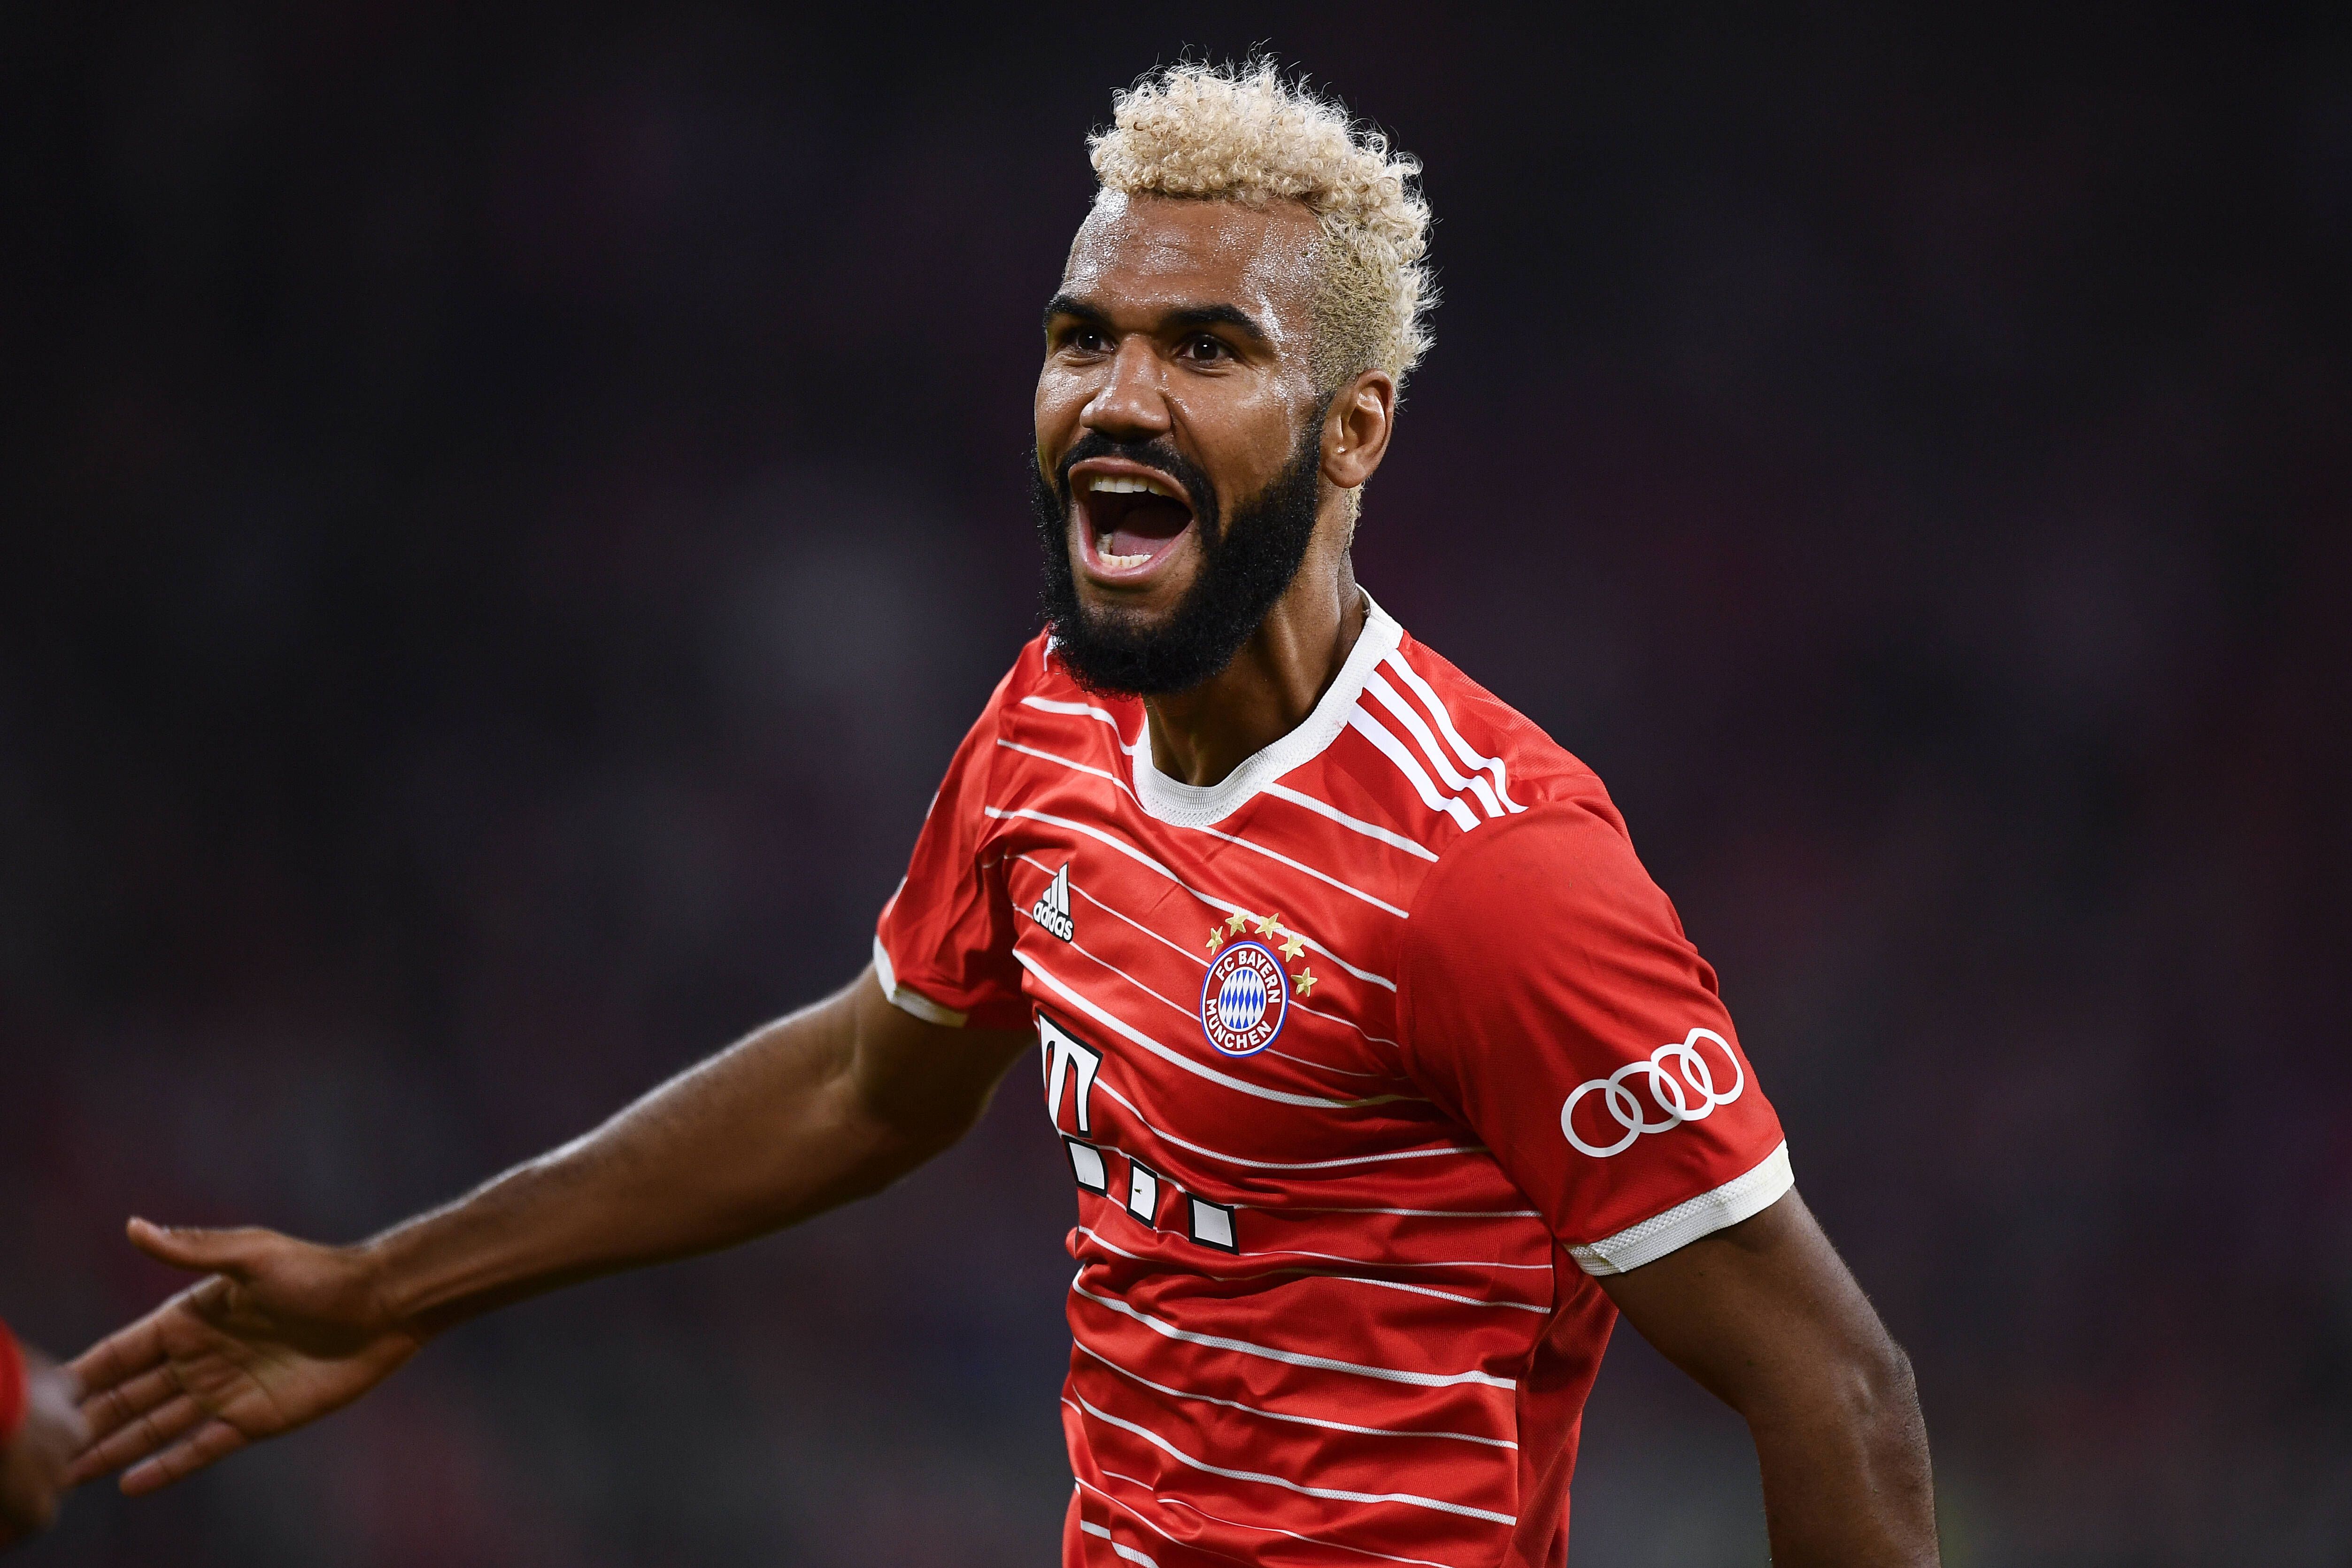 Eric Maxim Choupo-Moting has been in fine goalscoring form this season